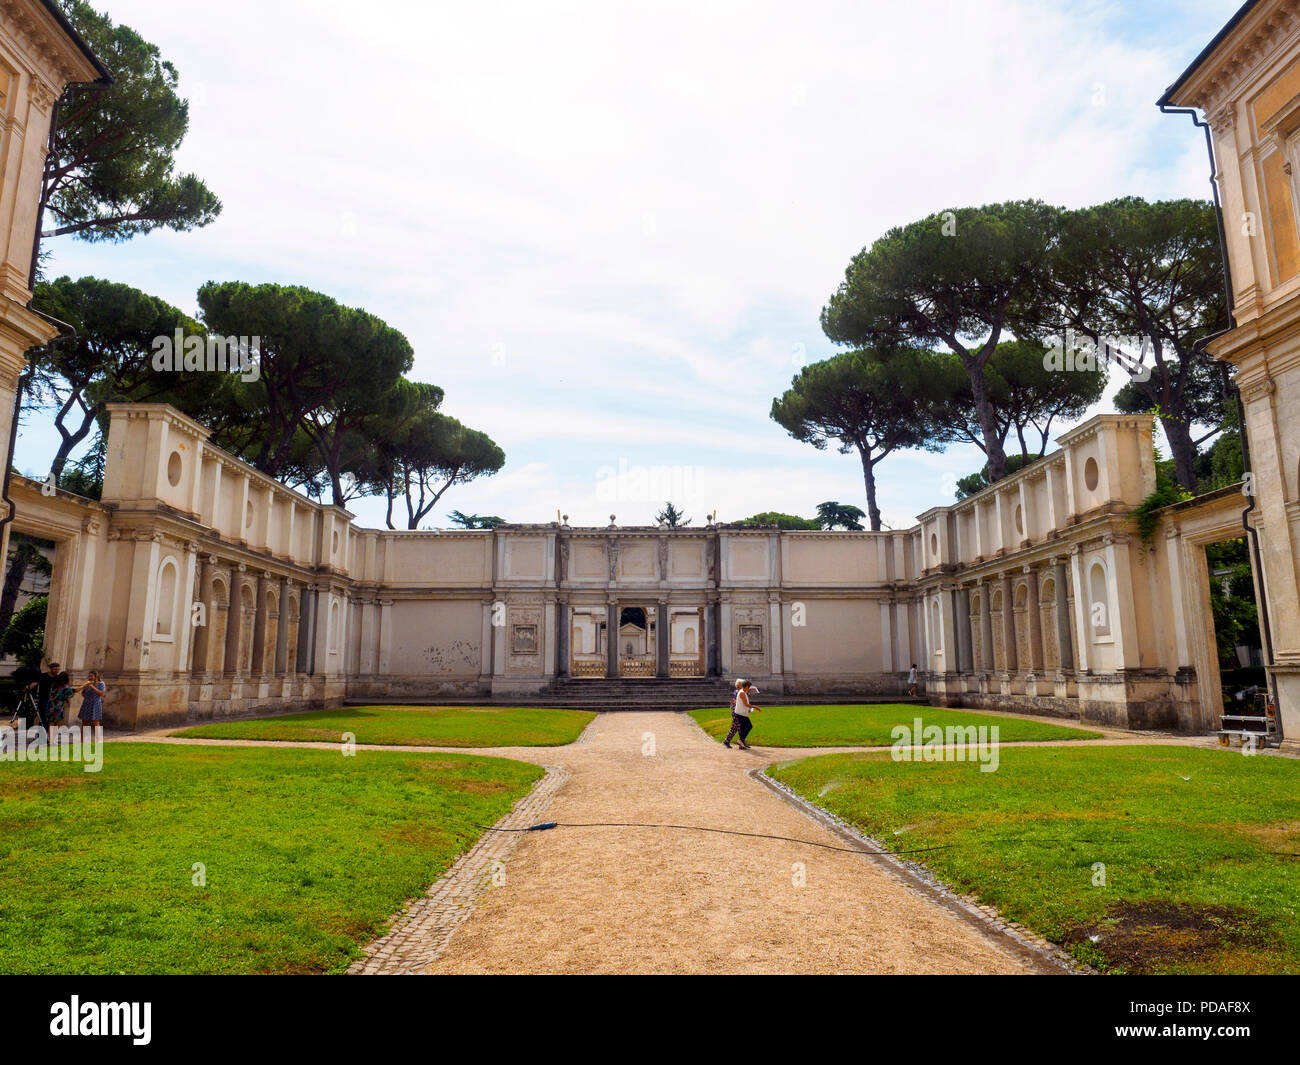 Tthe interior courtyard and the granite columned pavilion hall entrance to the Nymphaeum - National Etruscan Museum of Villa Giulia - Rome, Italy Stock Photo